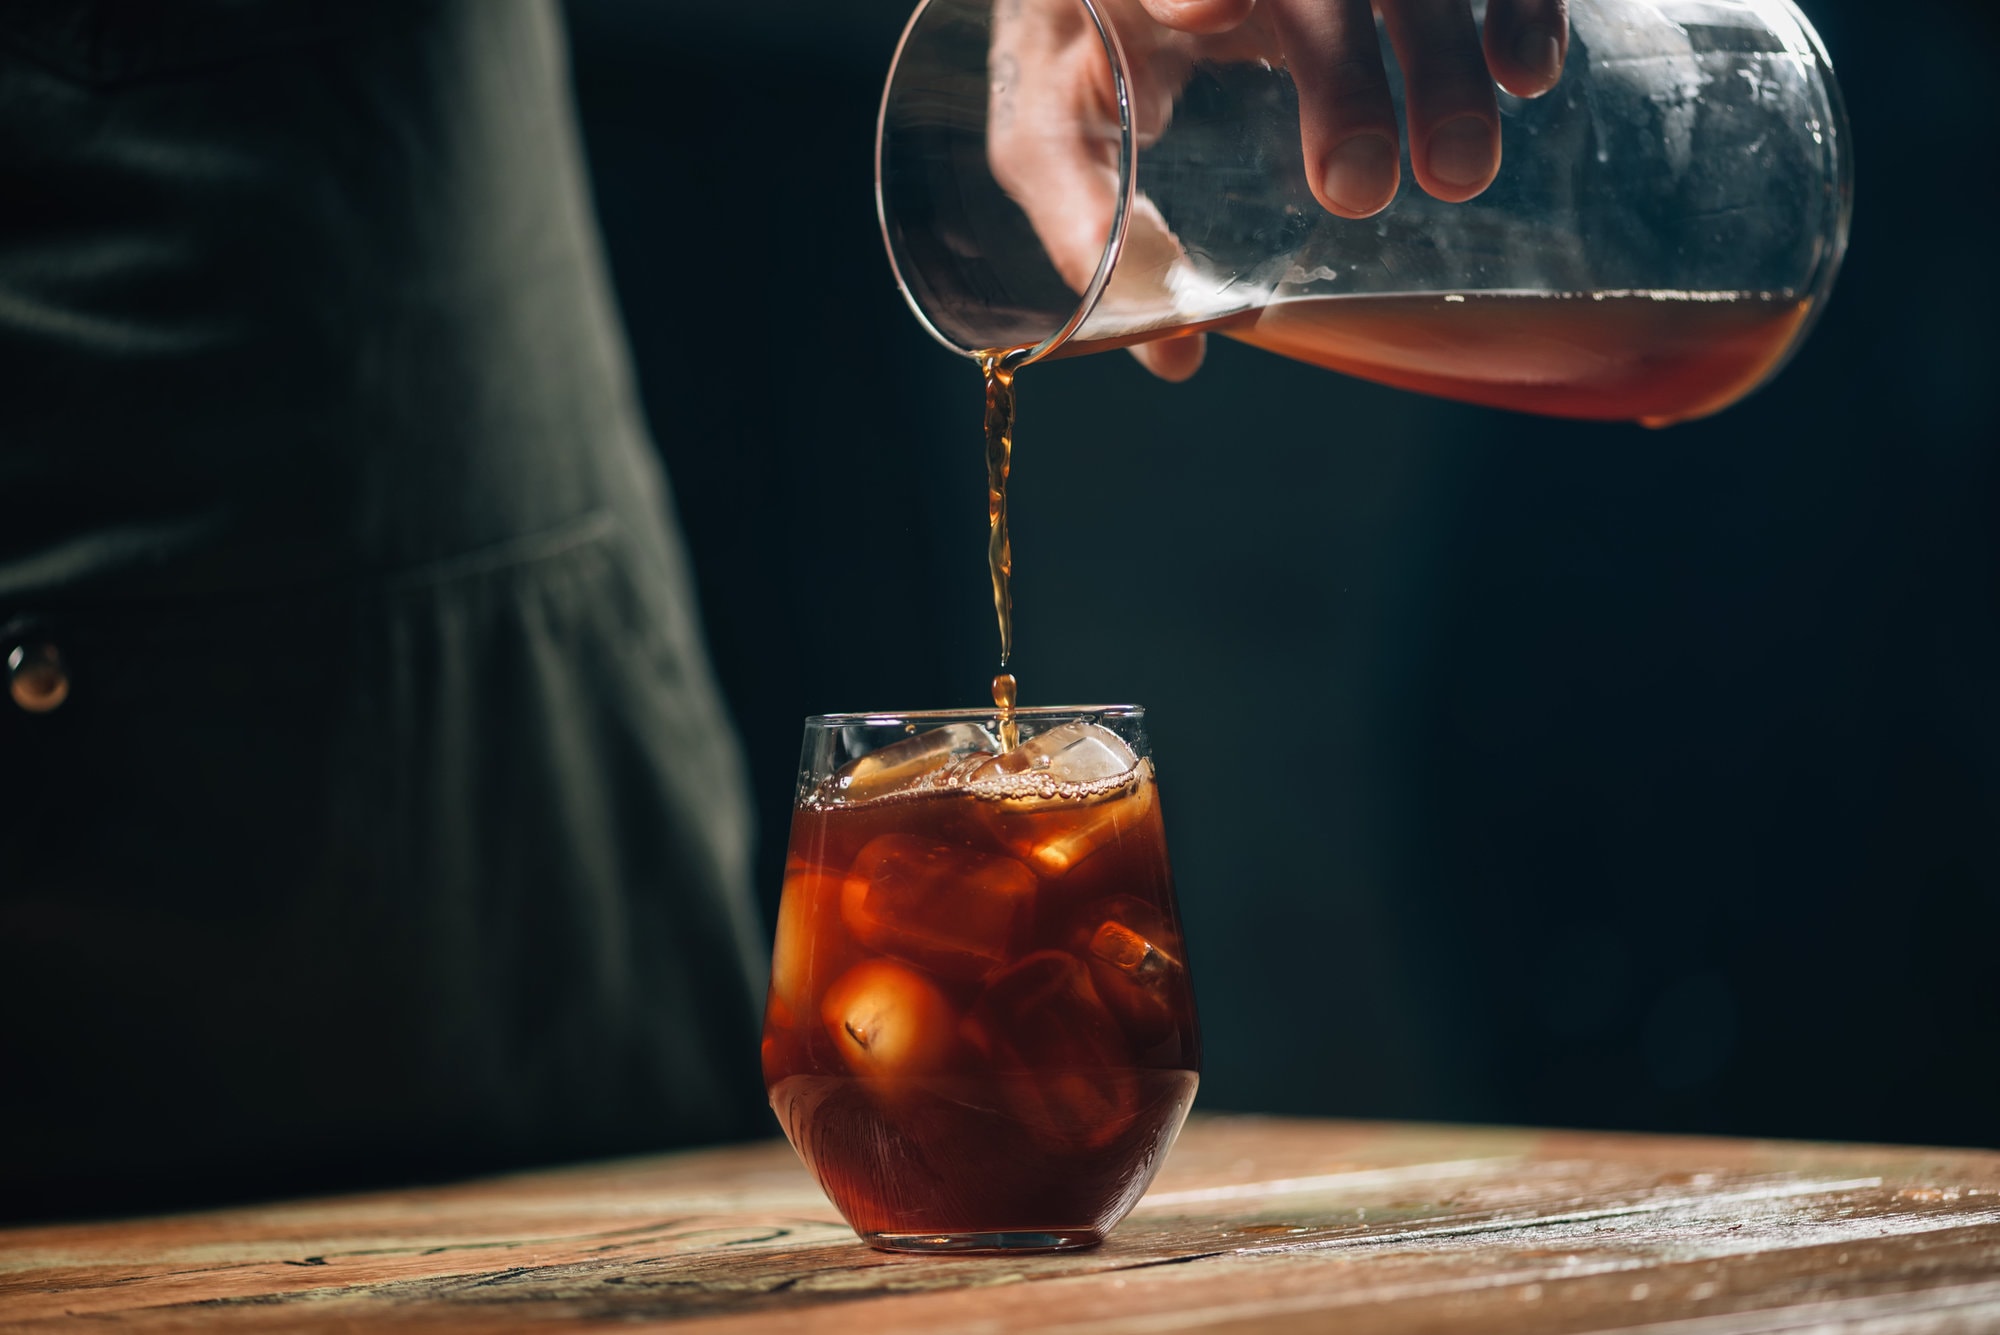 Coffee Made For Ice, Did you know that cold temperature changes coffee  flavours depending on the origin and roast? Enjoy the full flavour of iced  coffee with our two new